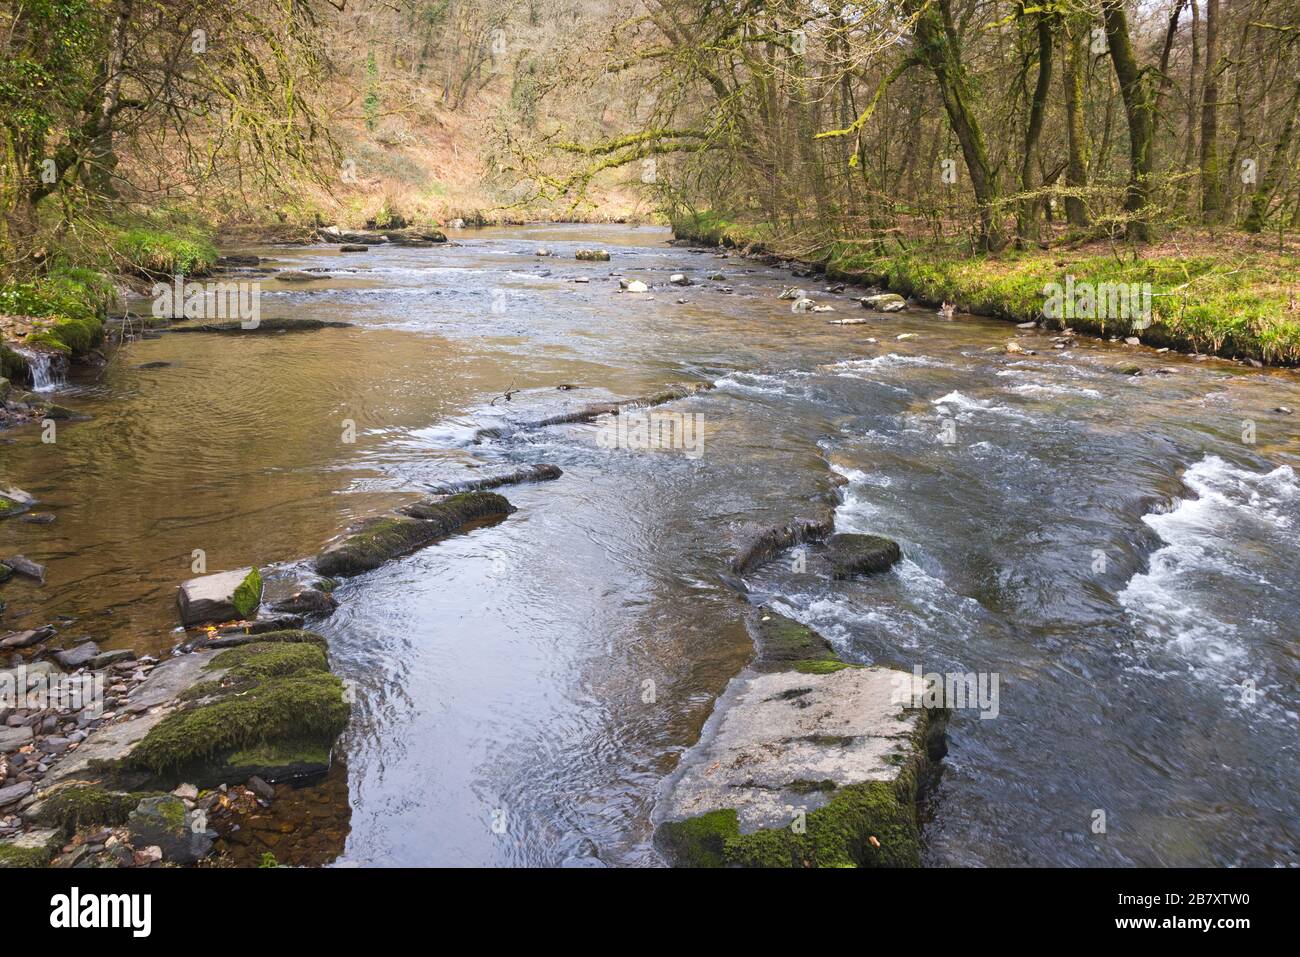 a Springtime picture of the River Barle close to Mounsey Castle near Dulverton, in Somerset, England,  part of the Exmoor national Park Stock Photo